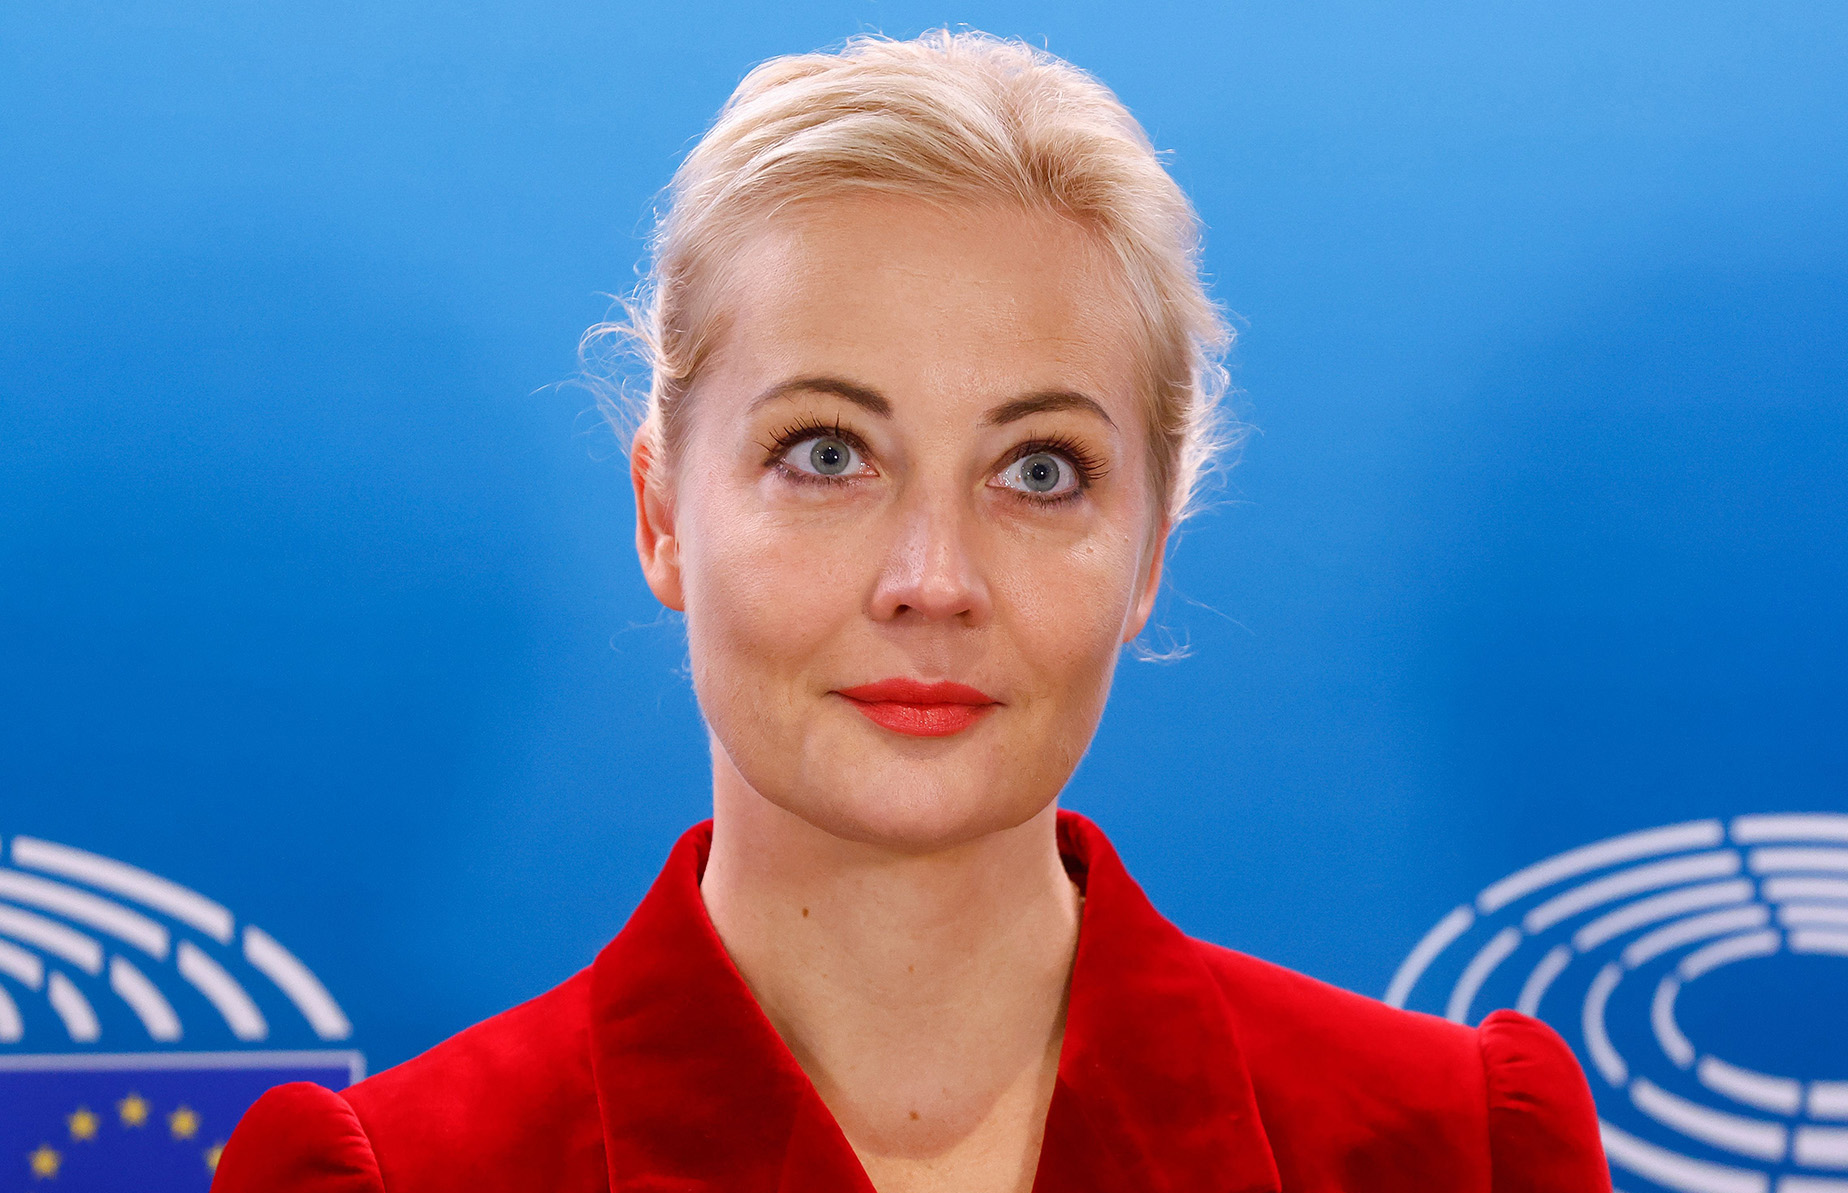 Alexey Navalny's wife, Yulia Navalnaya attends a meeting at the European Parliament in Brussels, Belgium, on September 28, 2022.